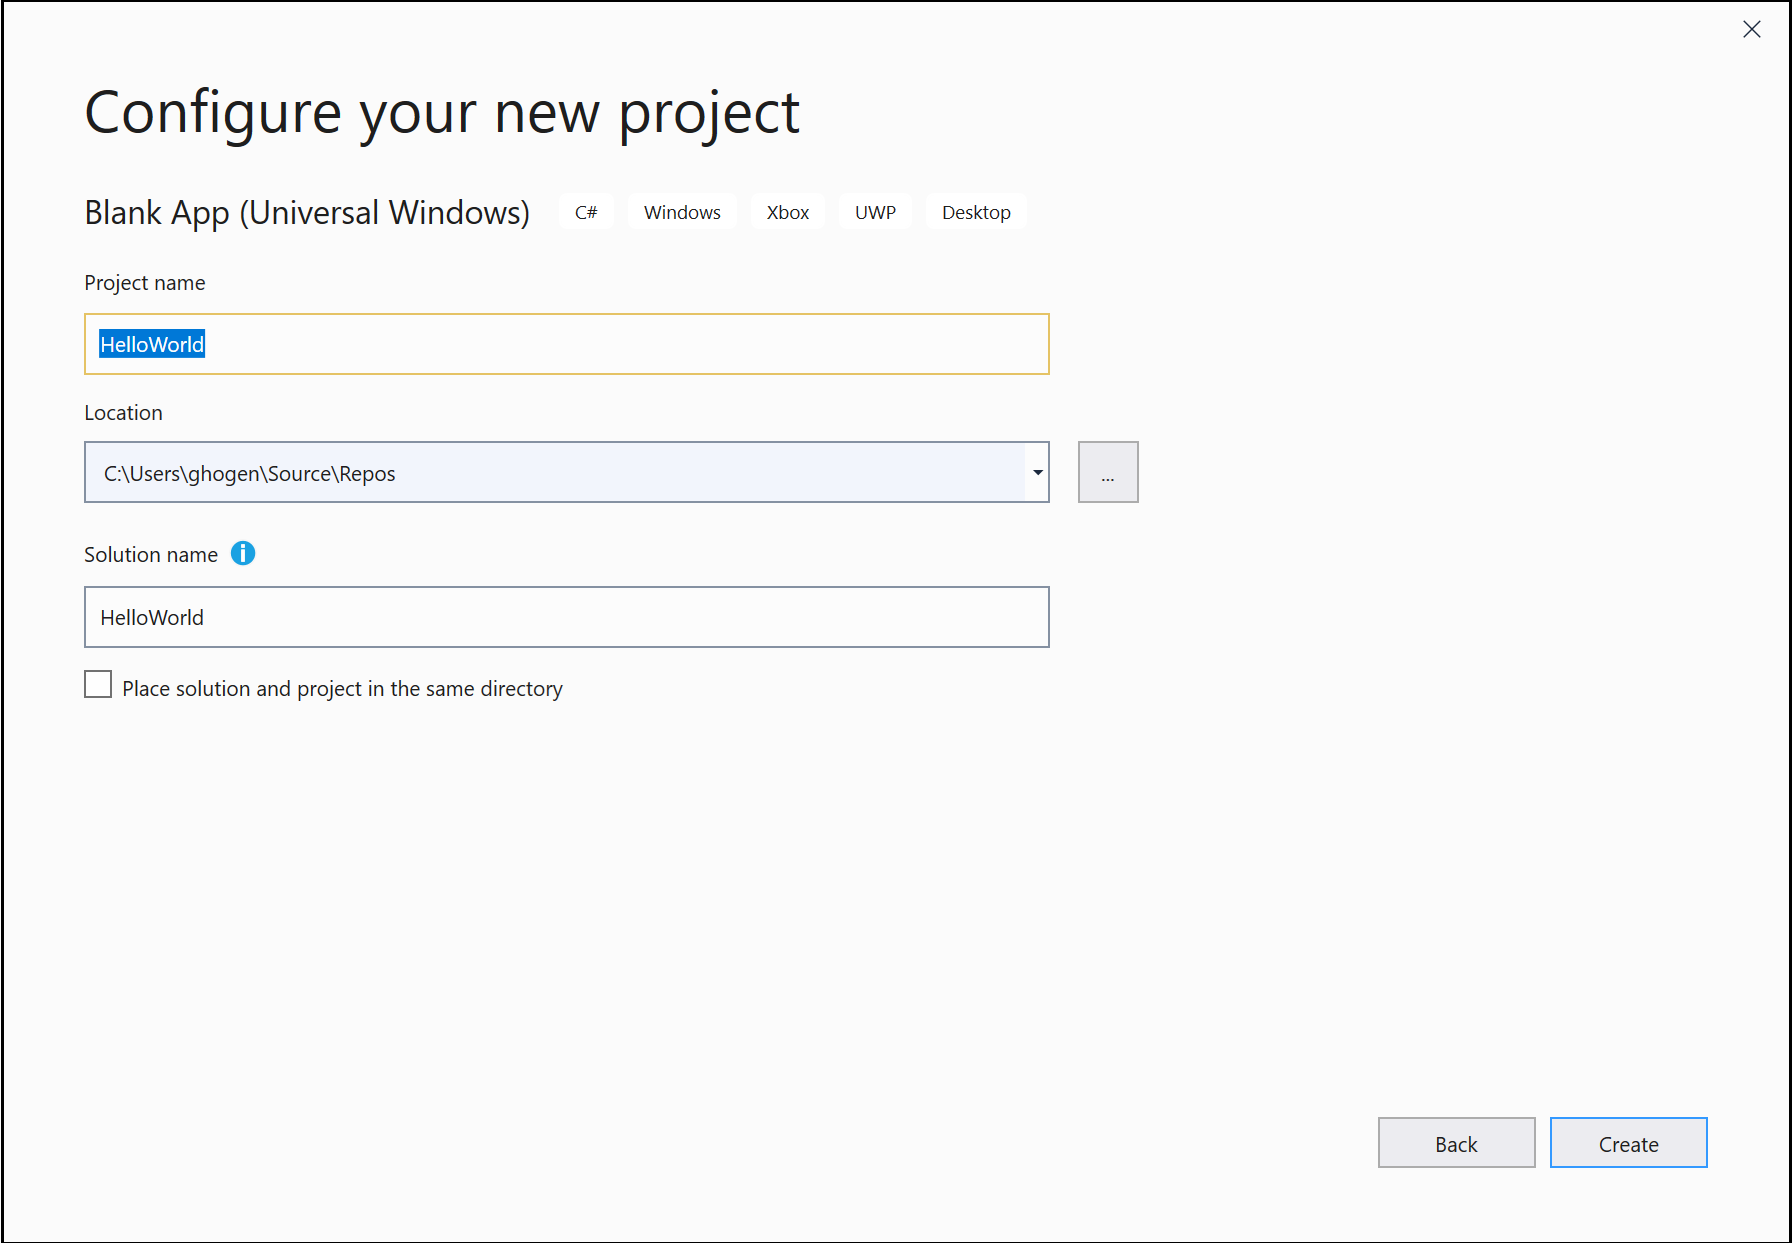 Screenshot of the 'Configure your new project' dialog with 'HelloWorld' entered in the Project name field.